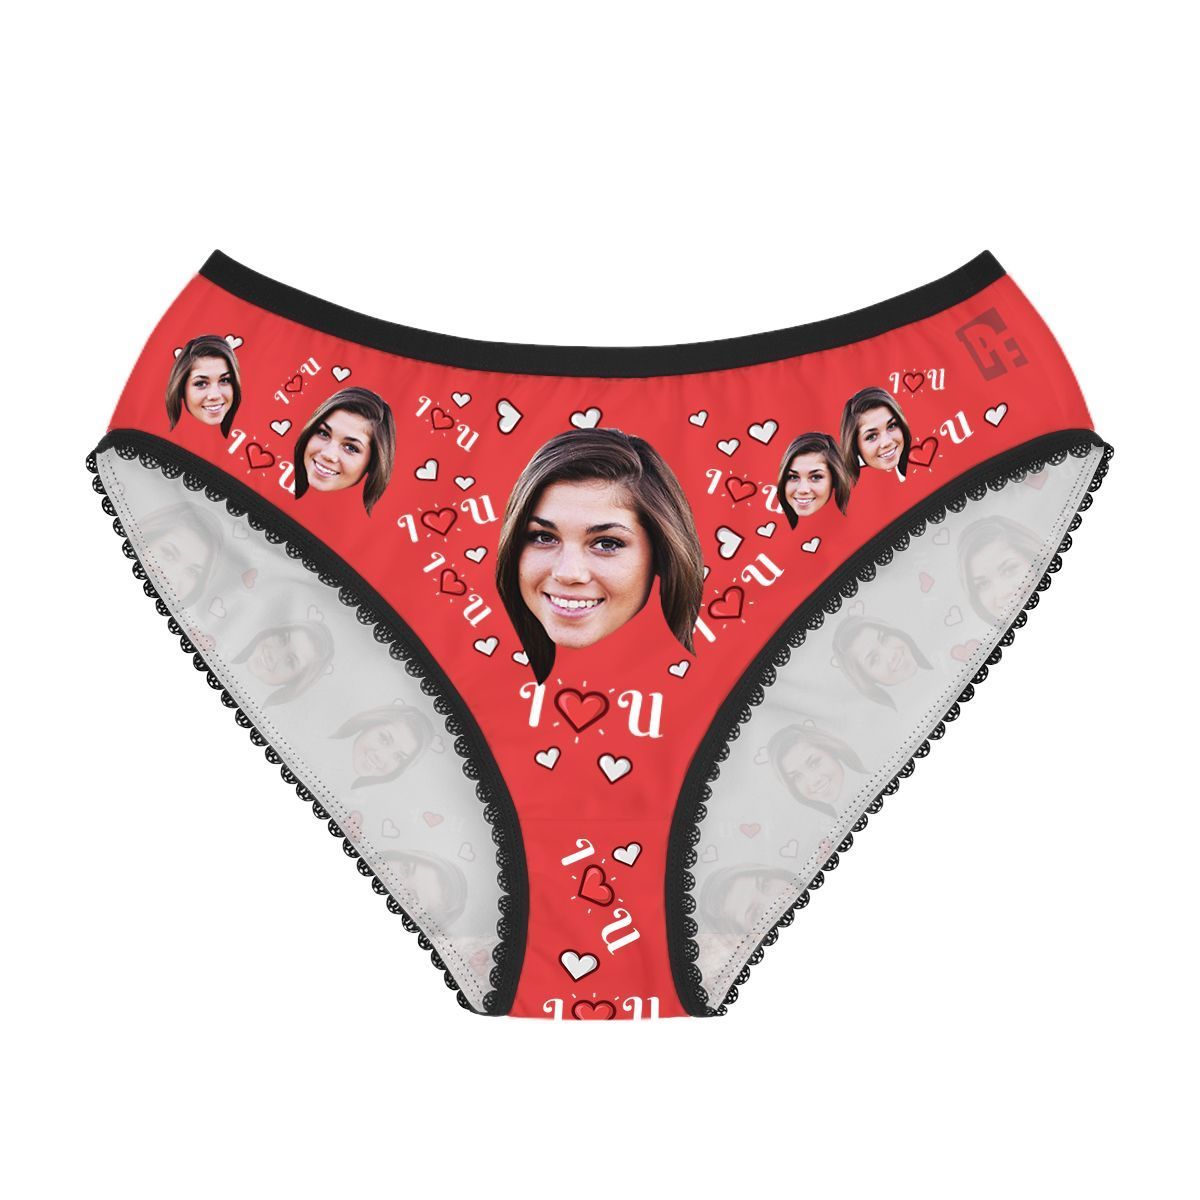 Red I <3 You women's underwear briefs personalized with photo printed on them